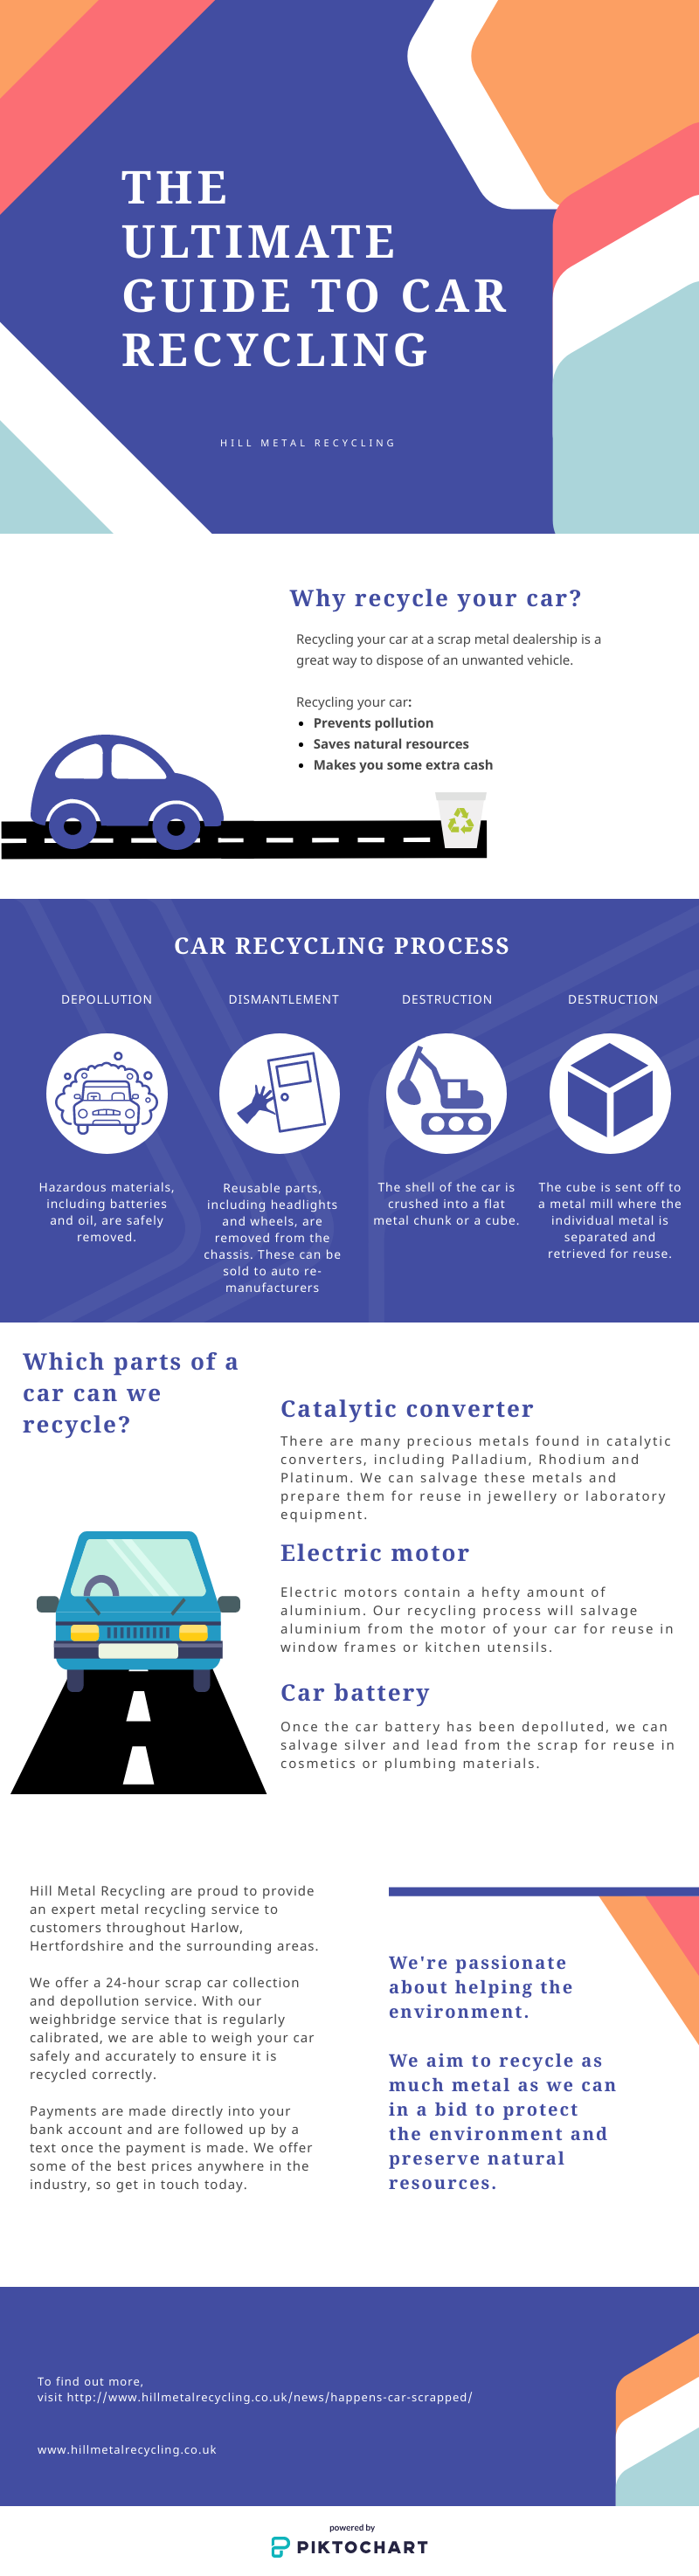 The ultimate guide to car recycling